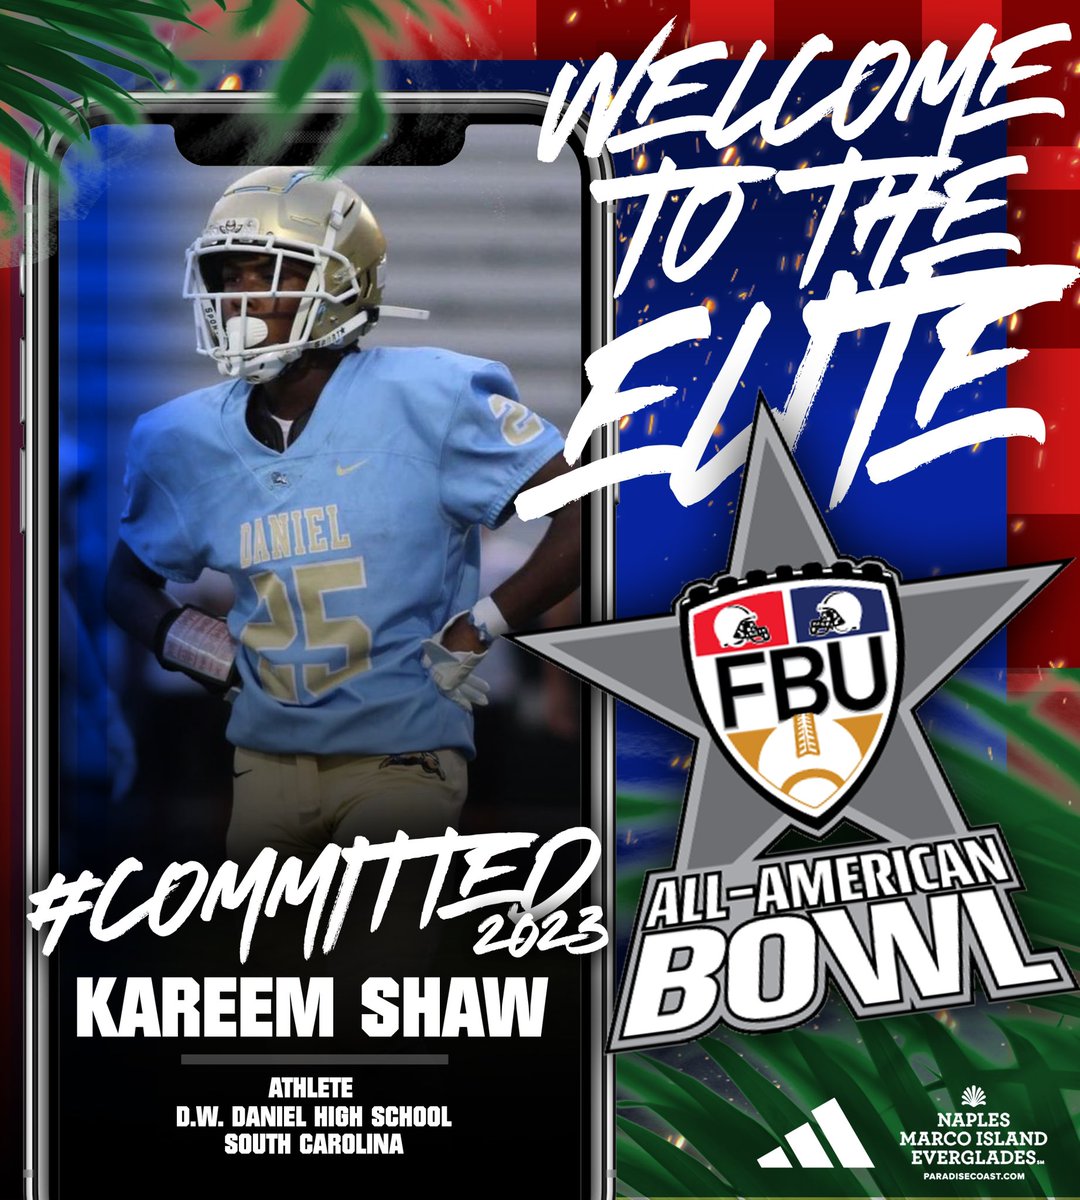 WELCOME TO THE ELITE 🌴 #FBUPathAlum Kareem Shaw punched his ticket to the #FBUAllAmerican Bowl 2023 👀 See you in Naples, FL this December 🔥 #FBU #GetBetterHere.